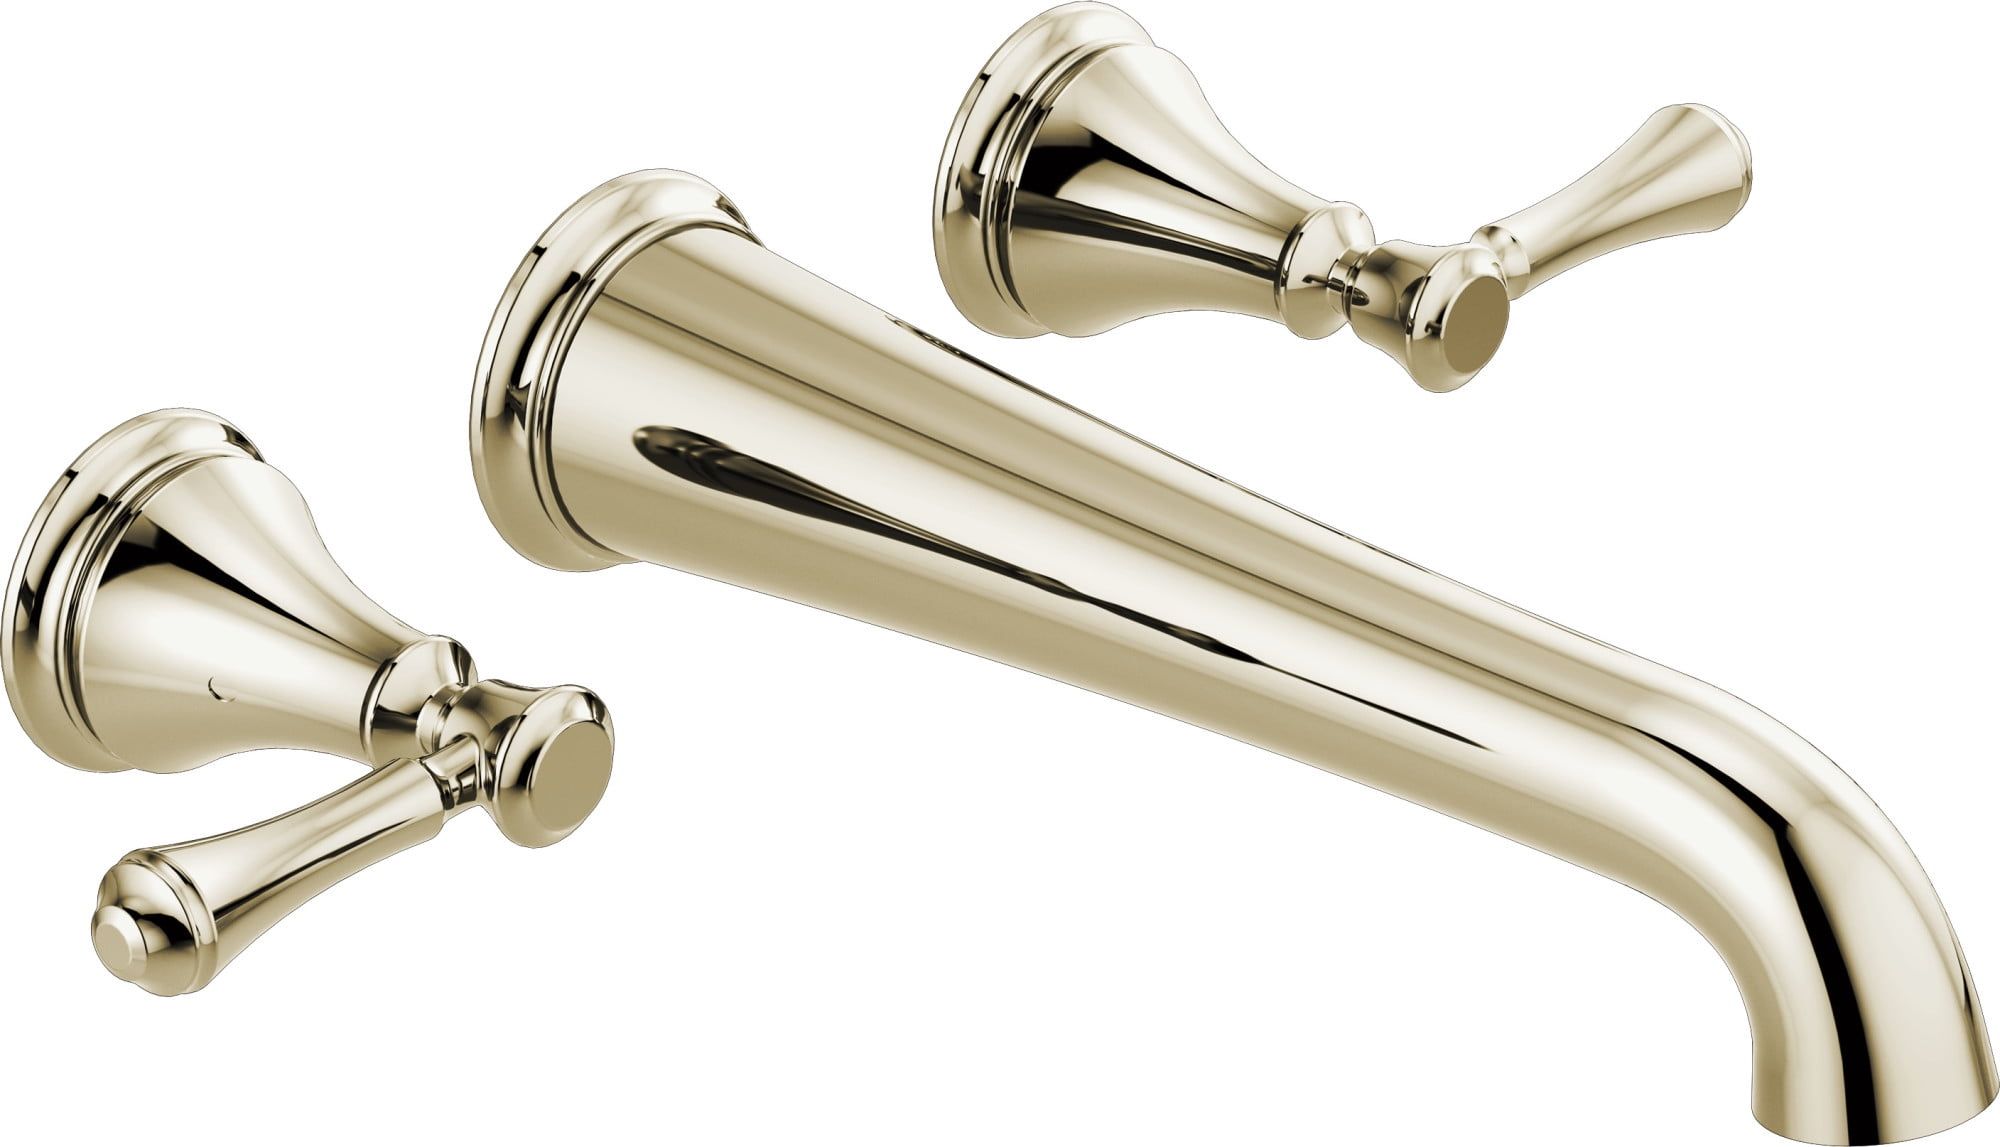 Elegant Classic Wall-Mounted Tub Filler in Polished Nickel